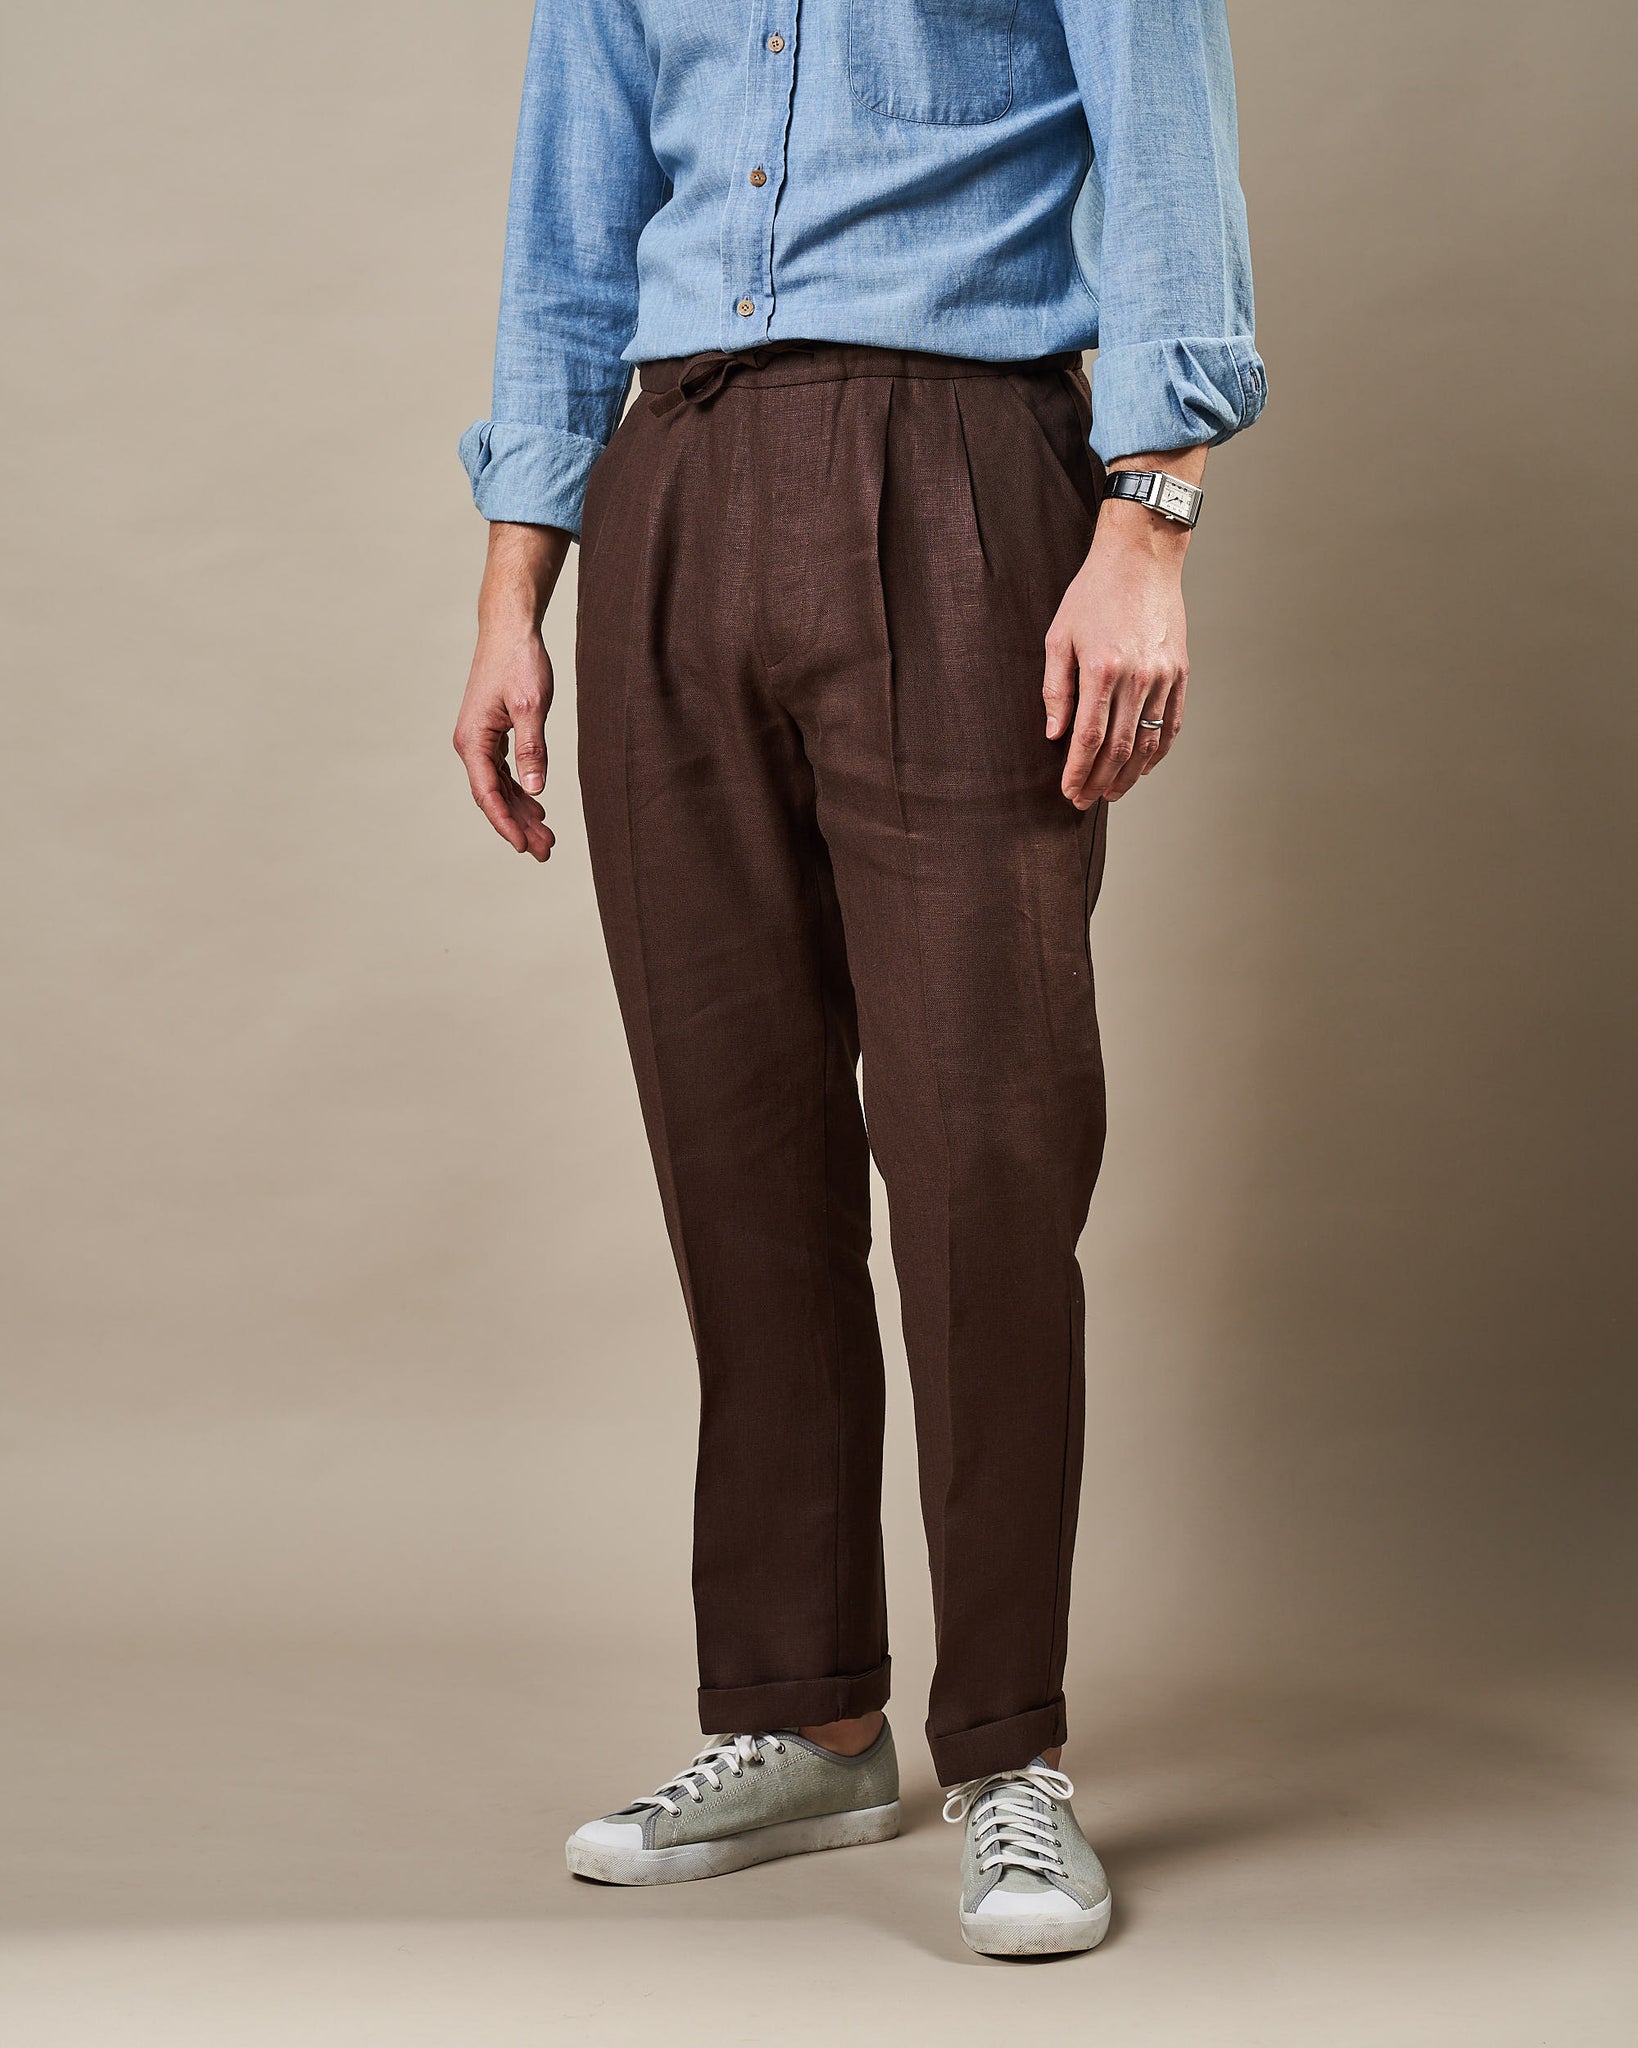 Andamen Casual Trousers  Buy Andamen Old Brown Linen Trouser Online   Nykaa Fashion